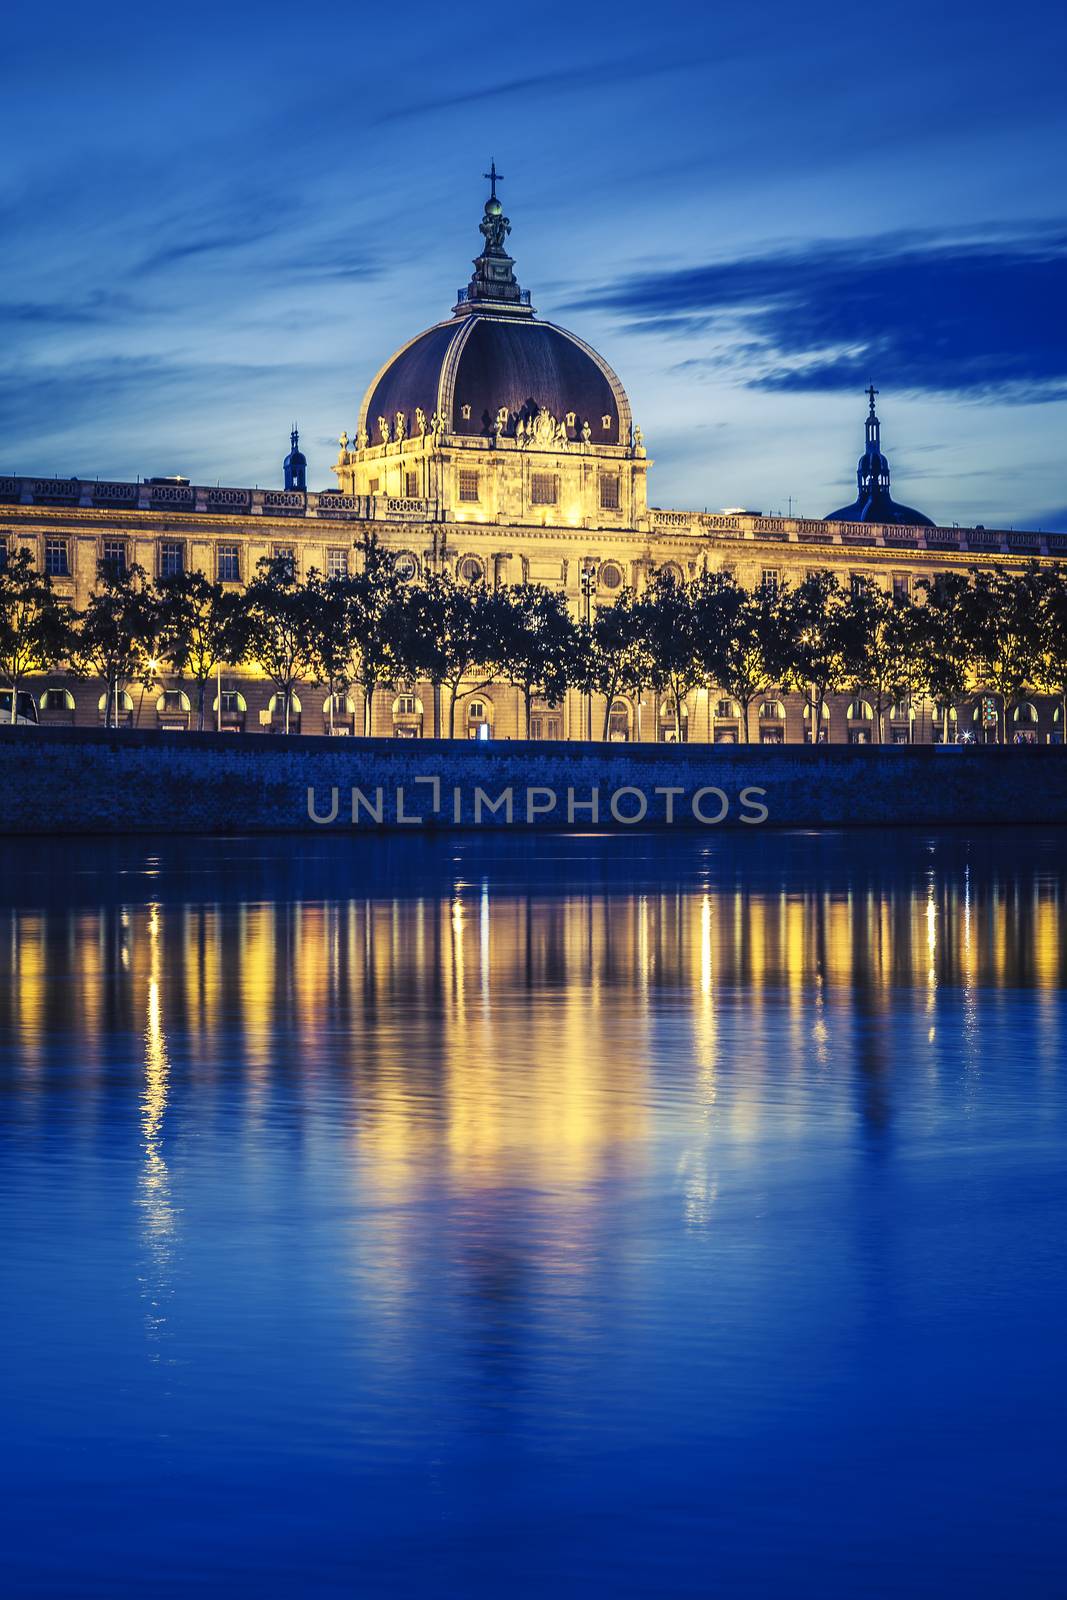 On the banks of Rhone by vwalakte